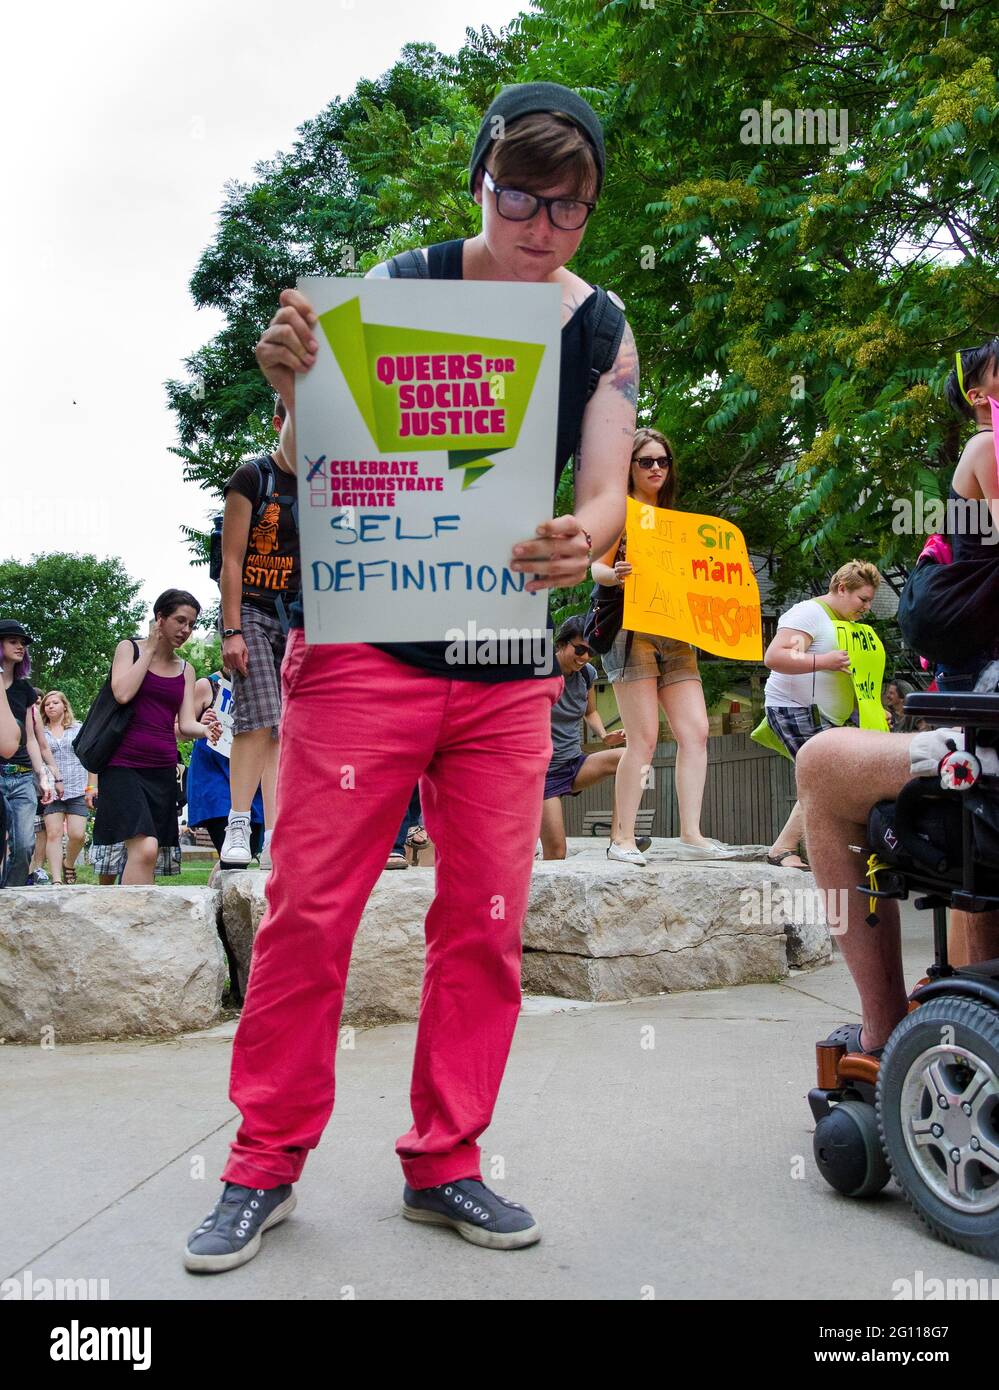 Participant holding banner at pride parade Toronto, full shot of bespectacled woman standing on a garden path with more people closing in, in the back Stock Photo